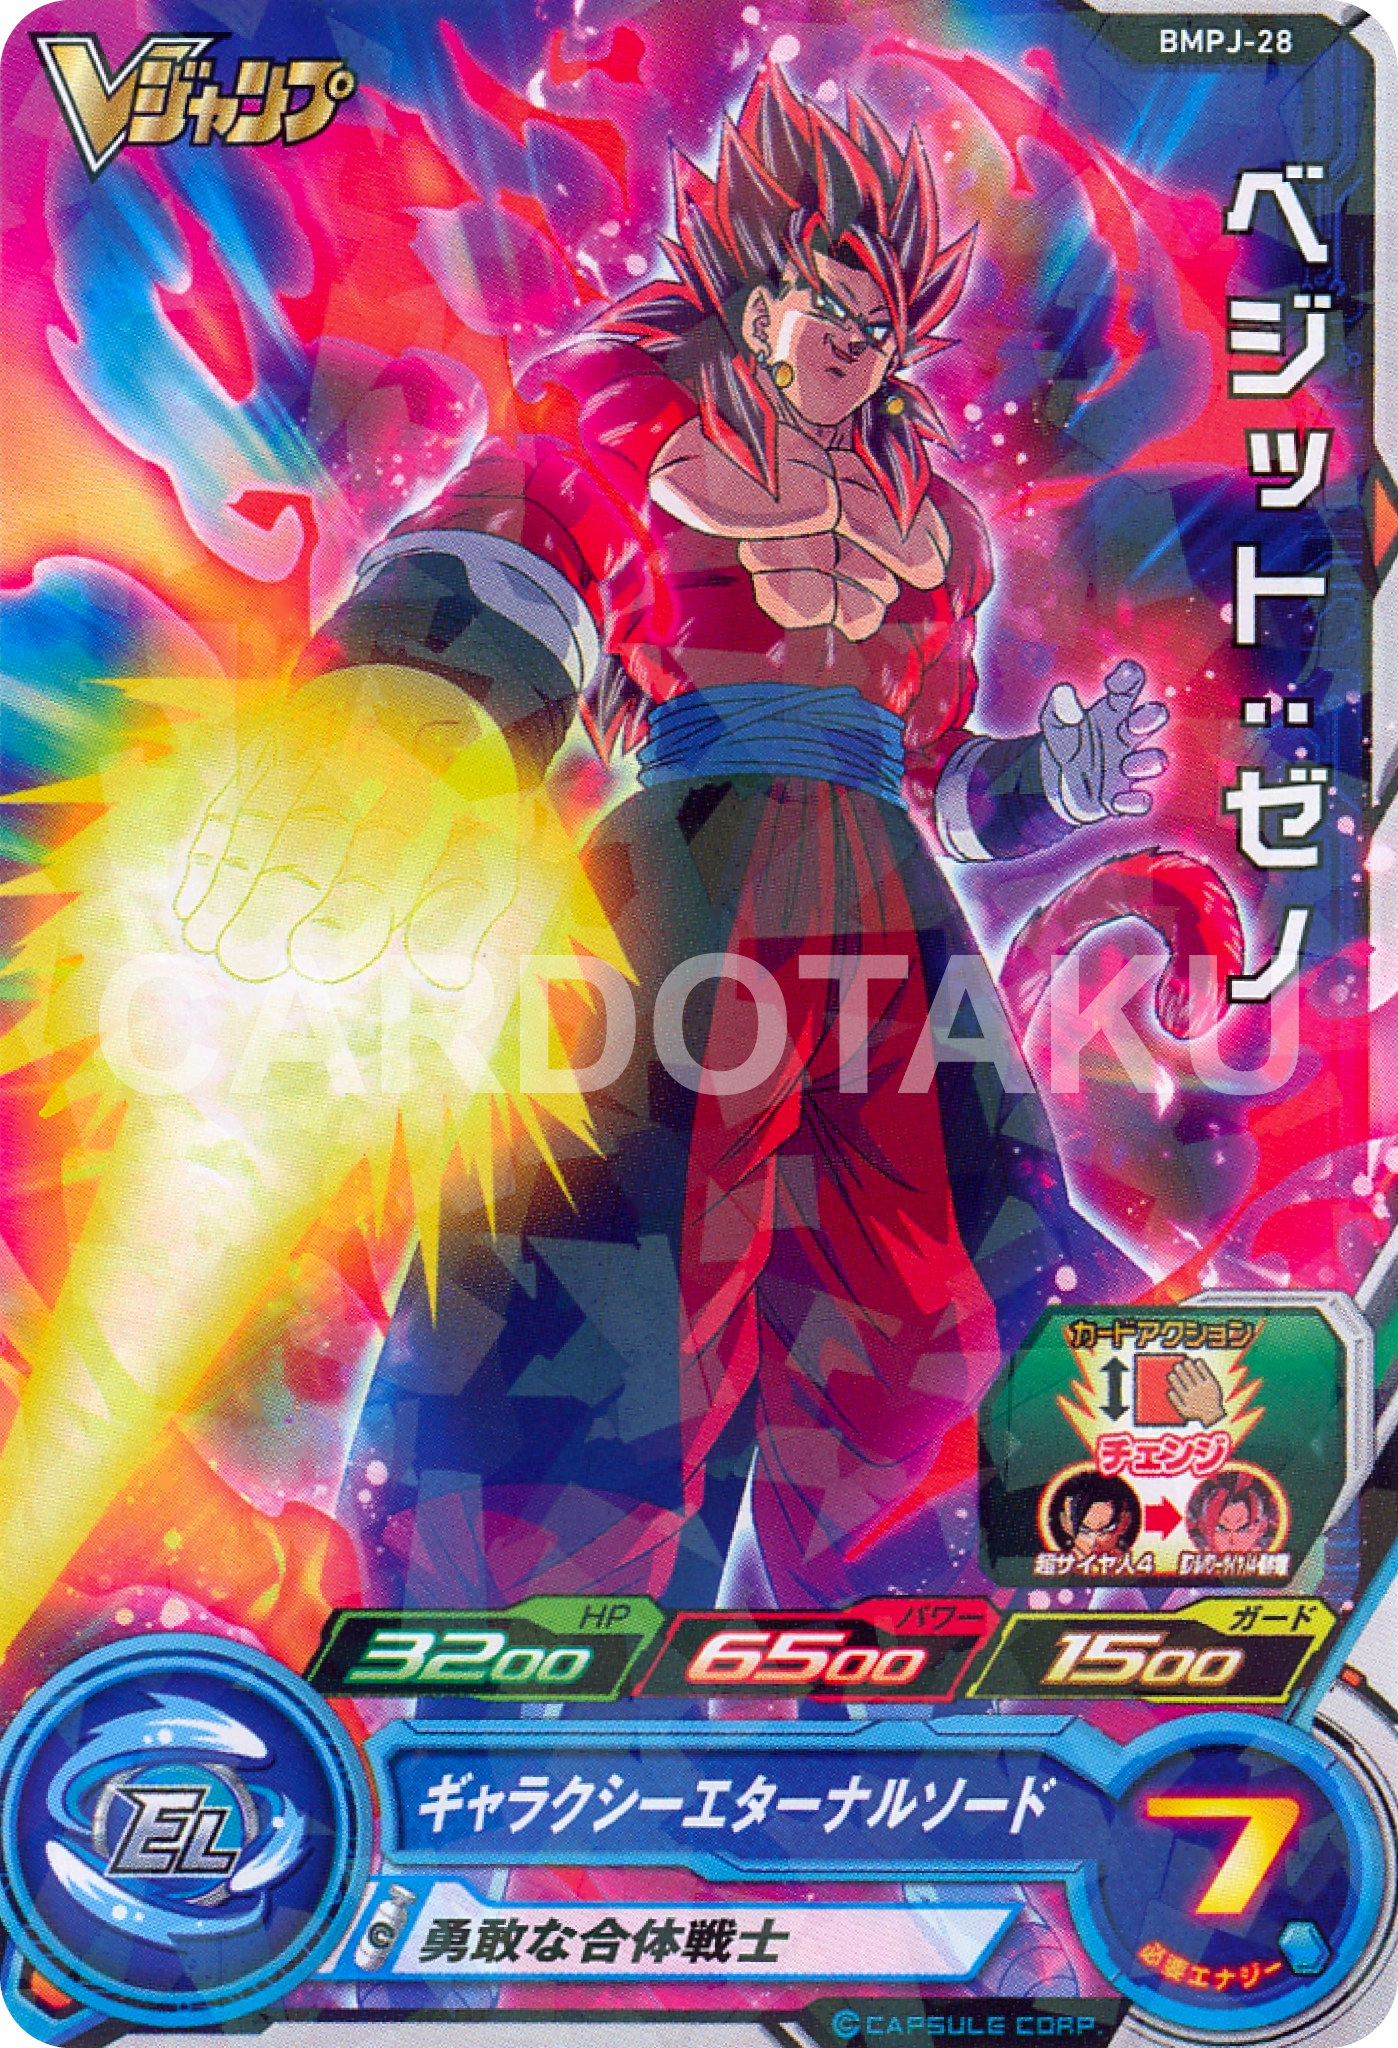 SUPER DRAGON BALL HEROES BMPJ-28  Promotional card sold with the May 2021 issue of V Jump magazine released March 19 2021.  Vegetto : Xeno